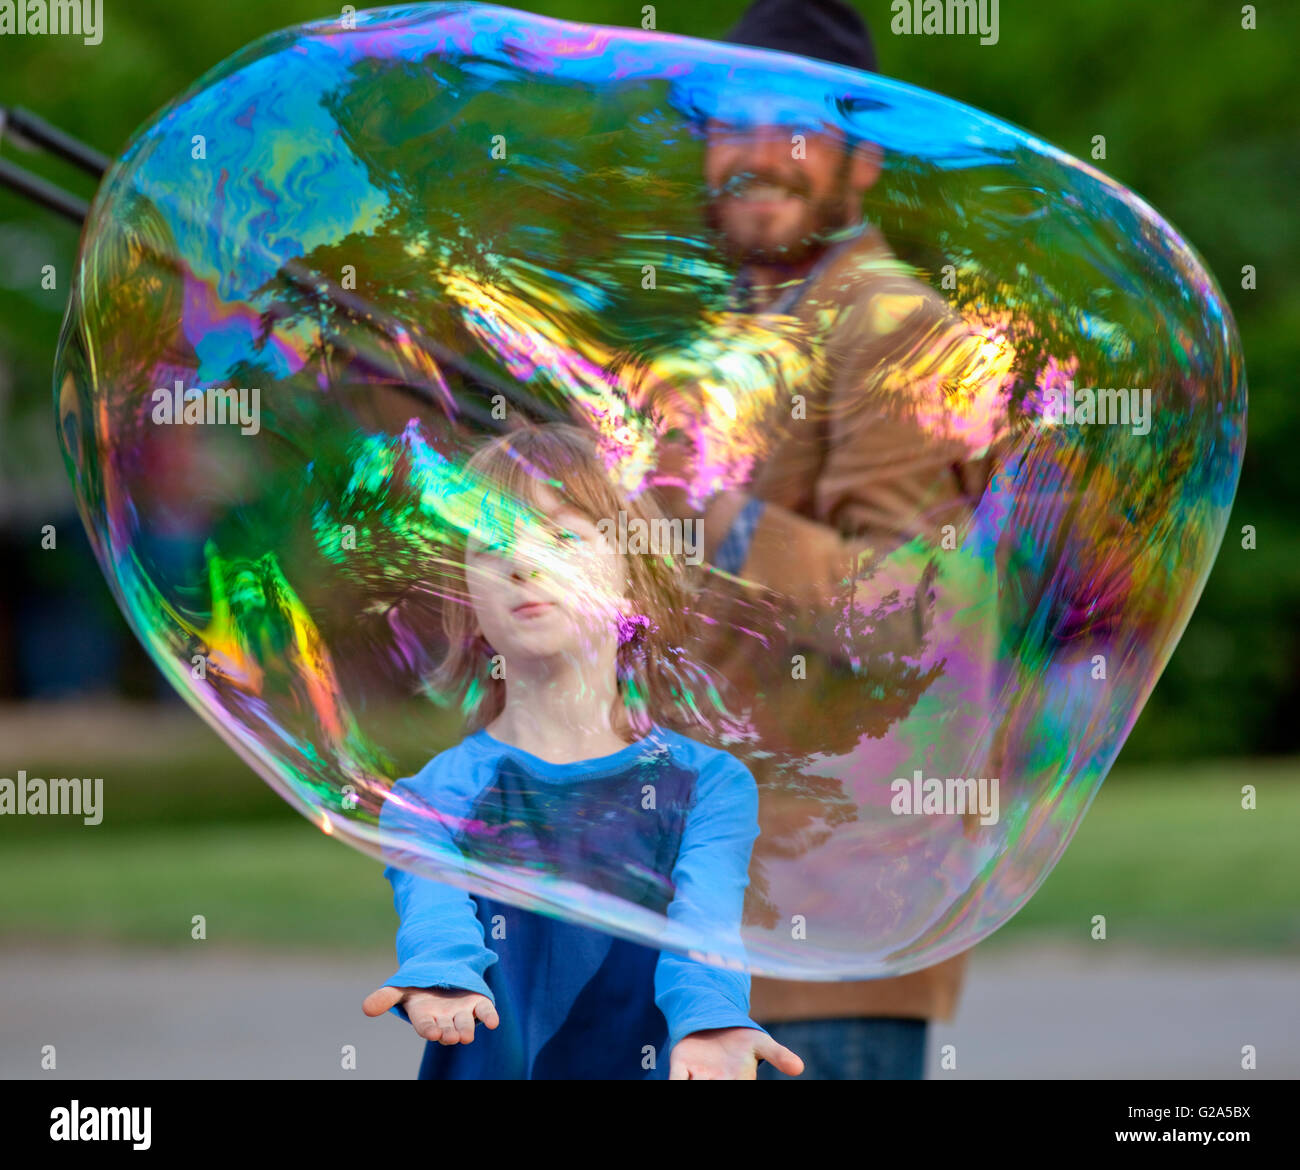 Boy Catching Large Soap Bubble Outdoors Stock Photo